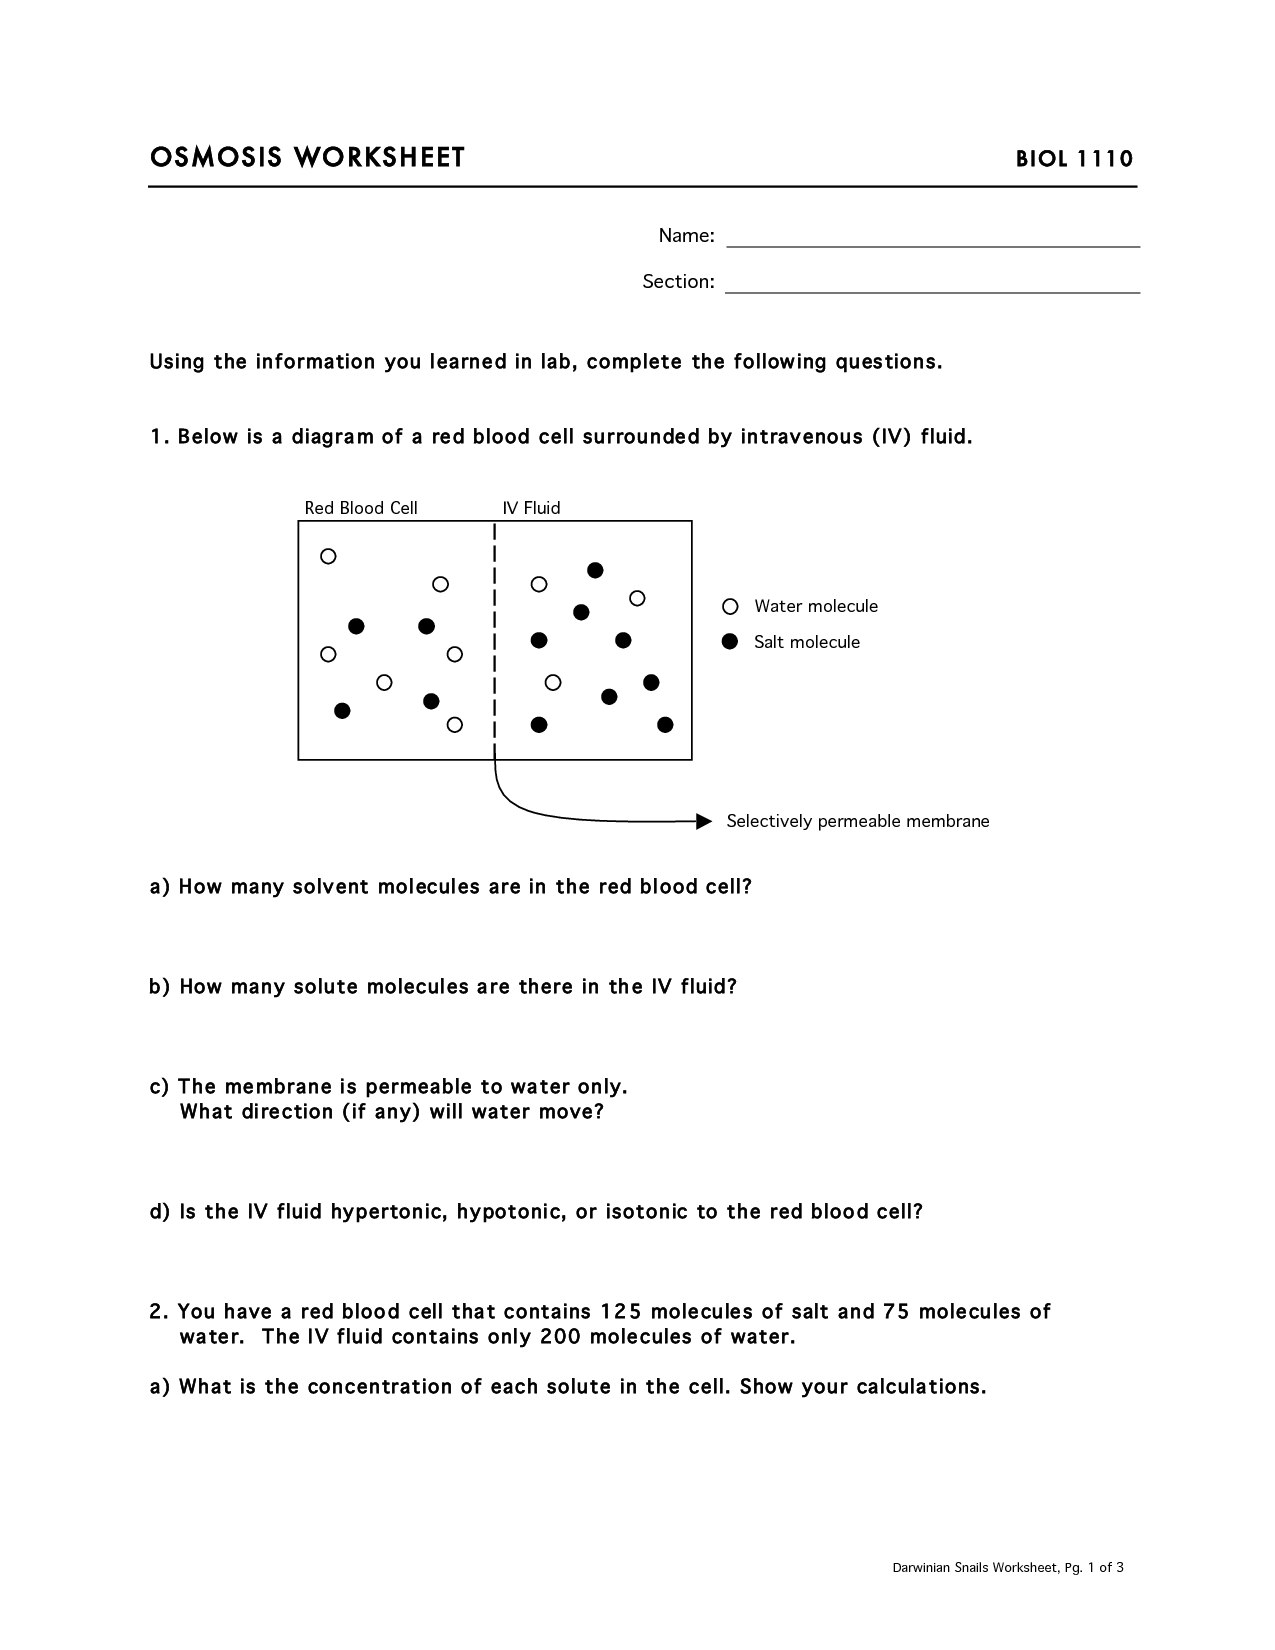 17 Best Images of Osmosis Worksheet Answers - Osmosis and ...